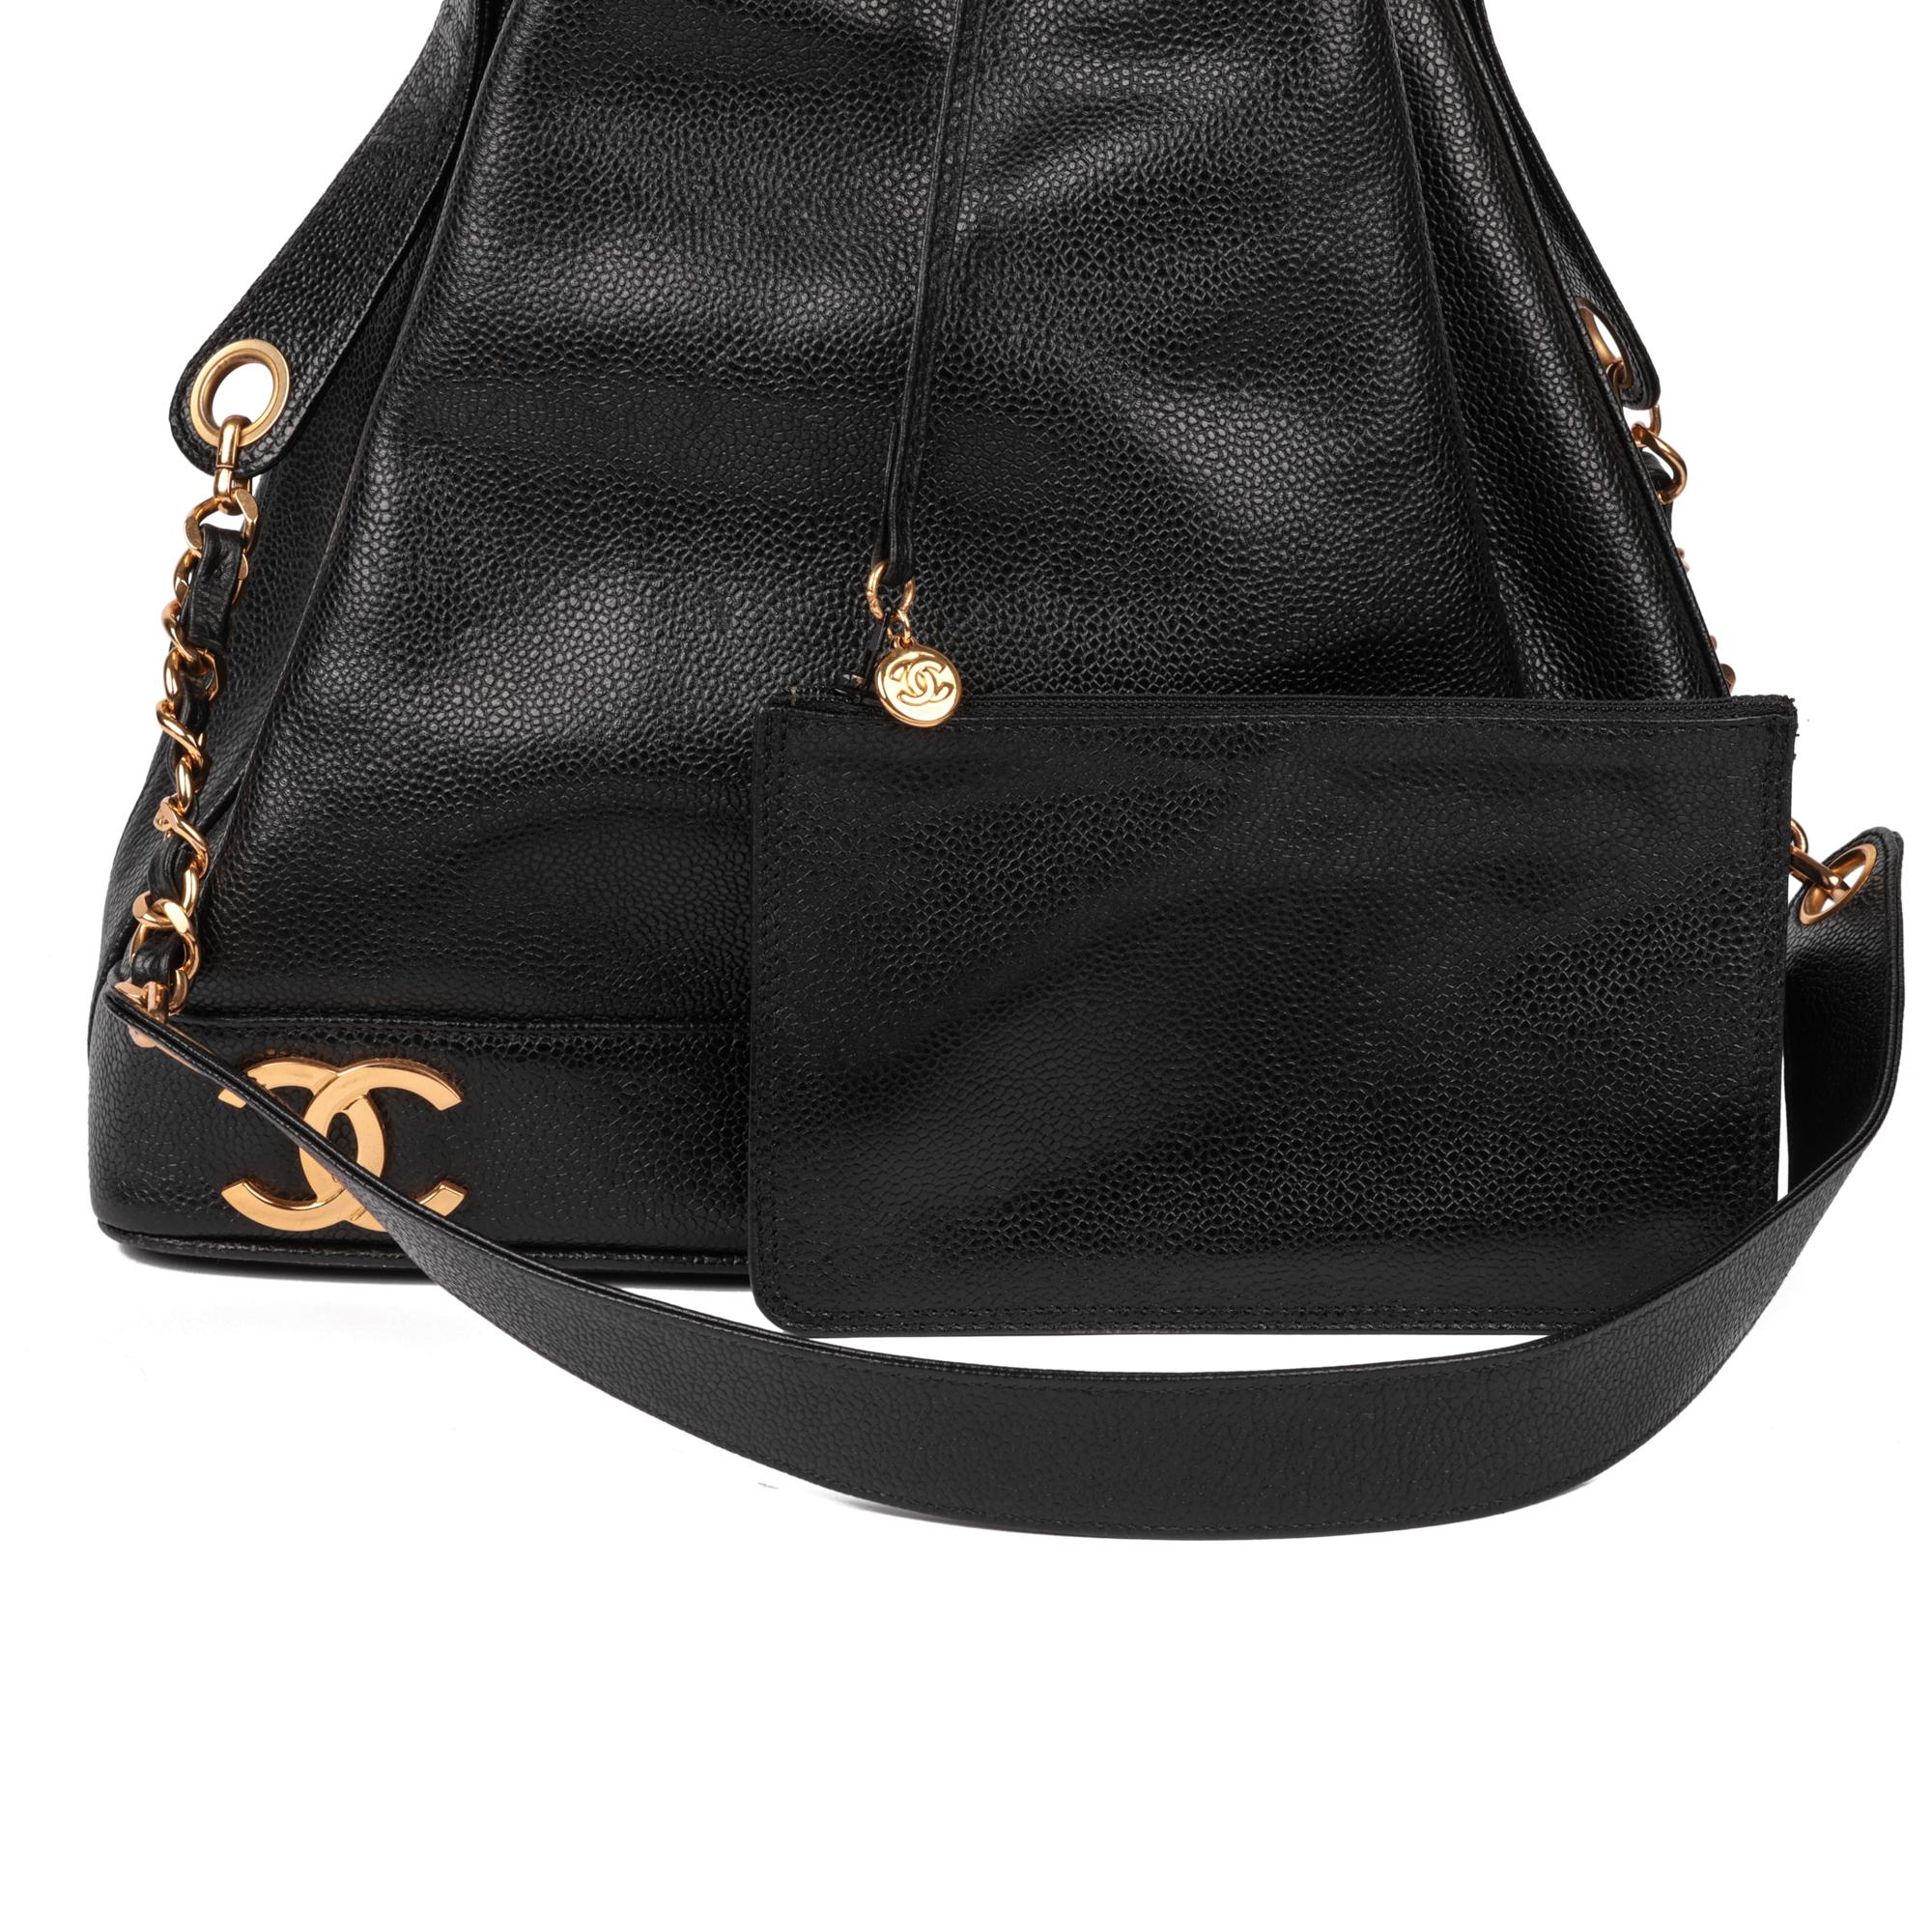 CHANEL Black Caviar Leather Vintage Classic Logo Trim Bucket Bag with Pouch For Sale 7